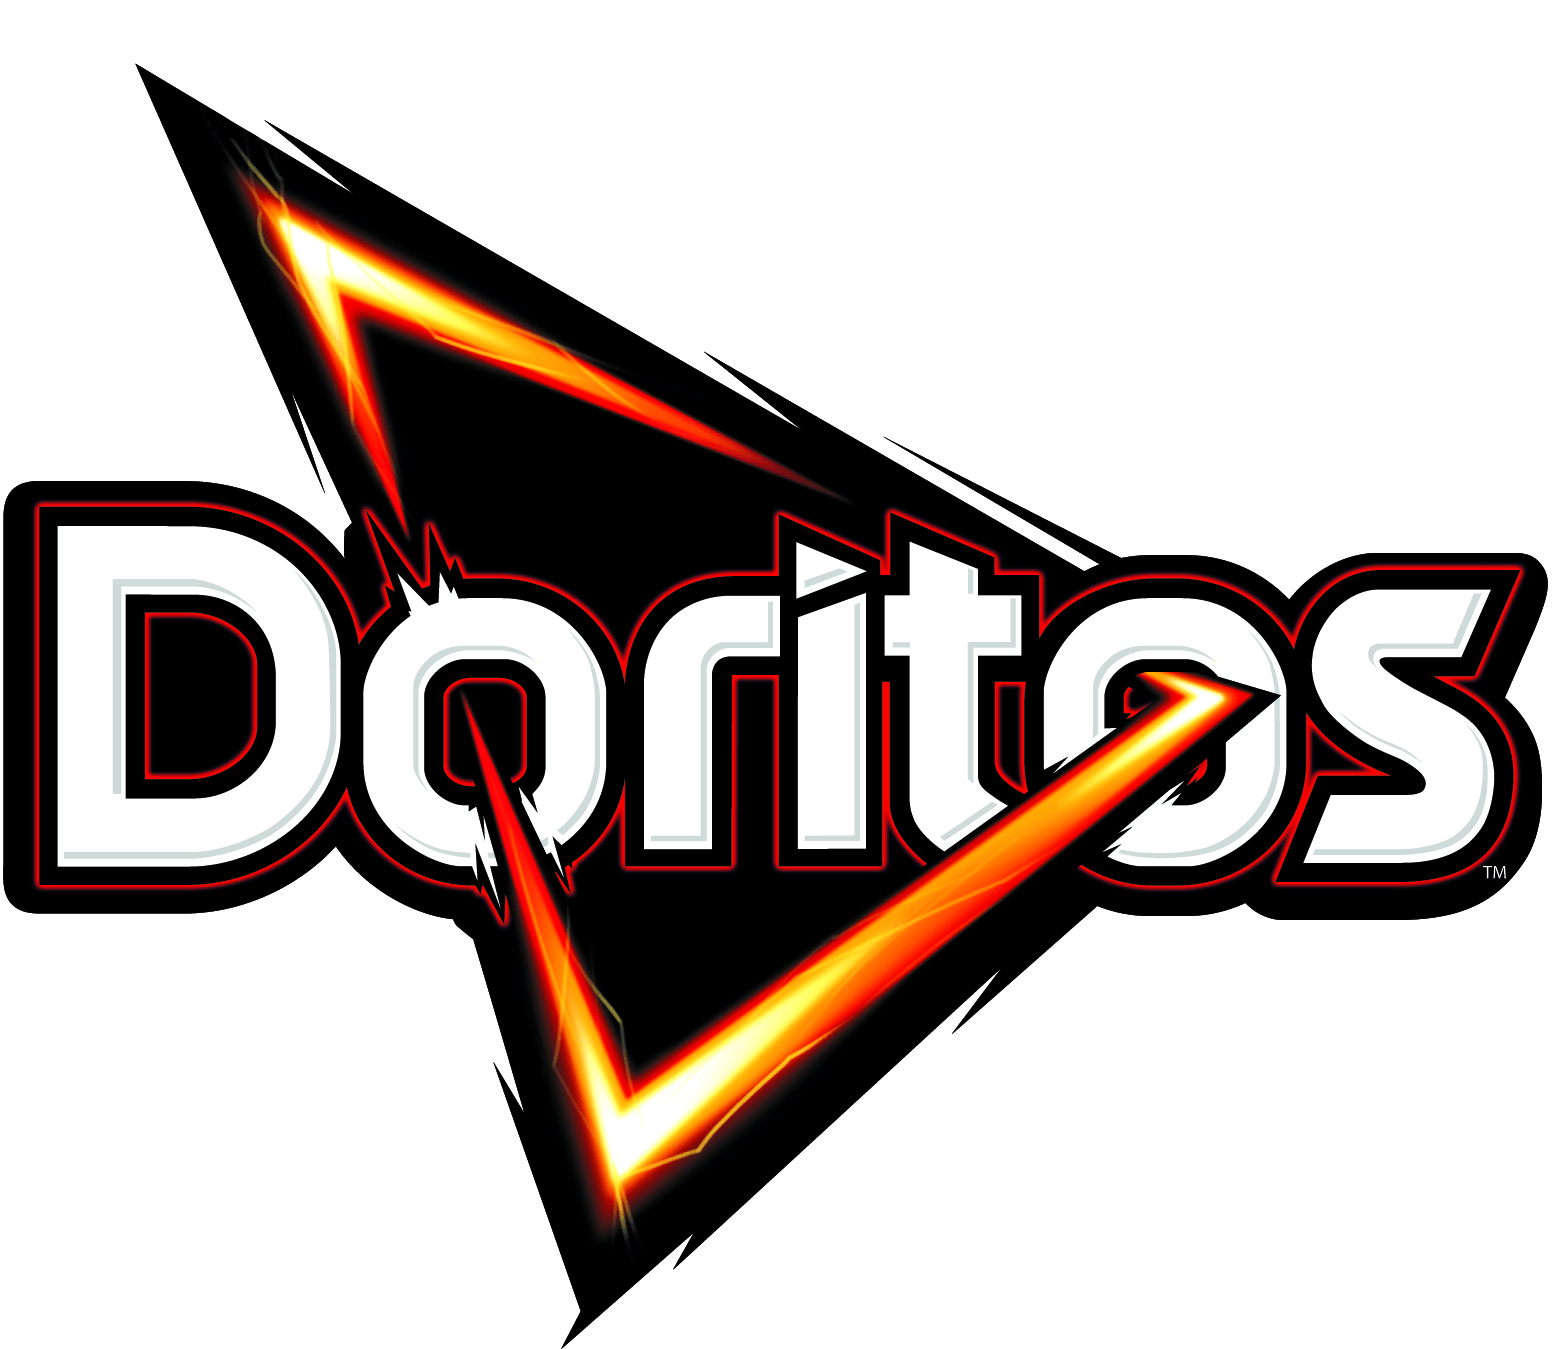 A green background with a black triangle in the foreground. The triangle is pointing to the right and has the word Doritos on it. The O is a flame and the T is a lightning bolt. - Doritos